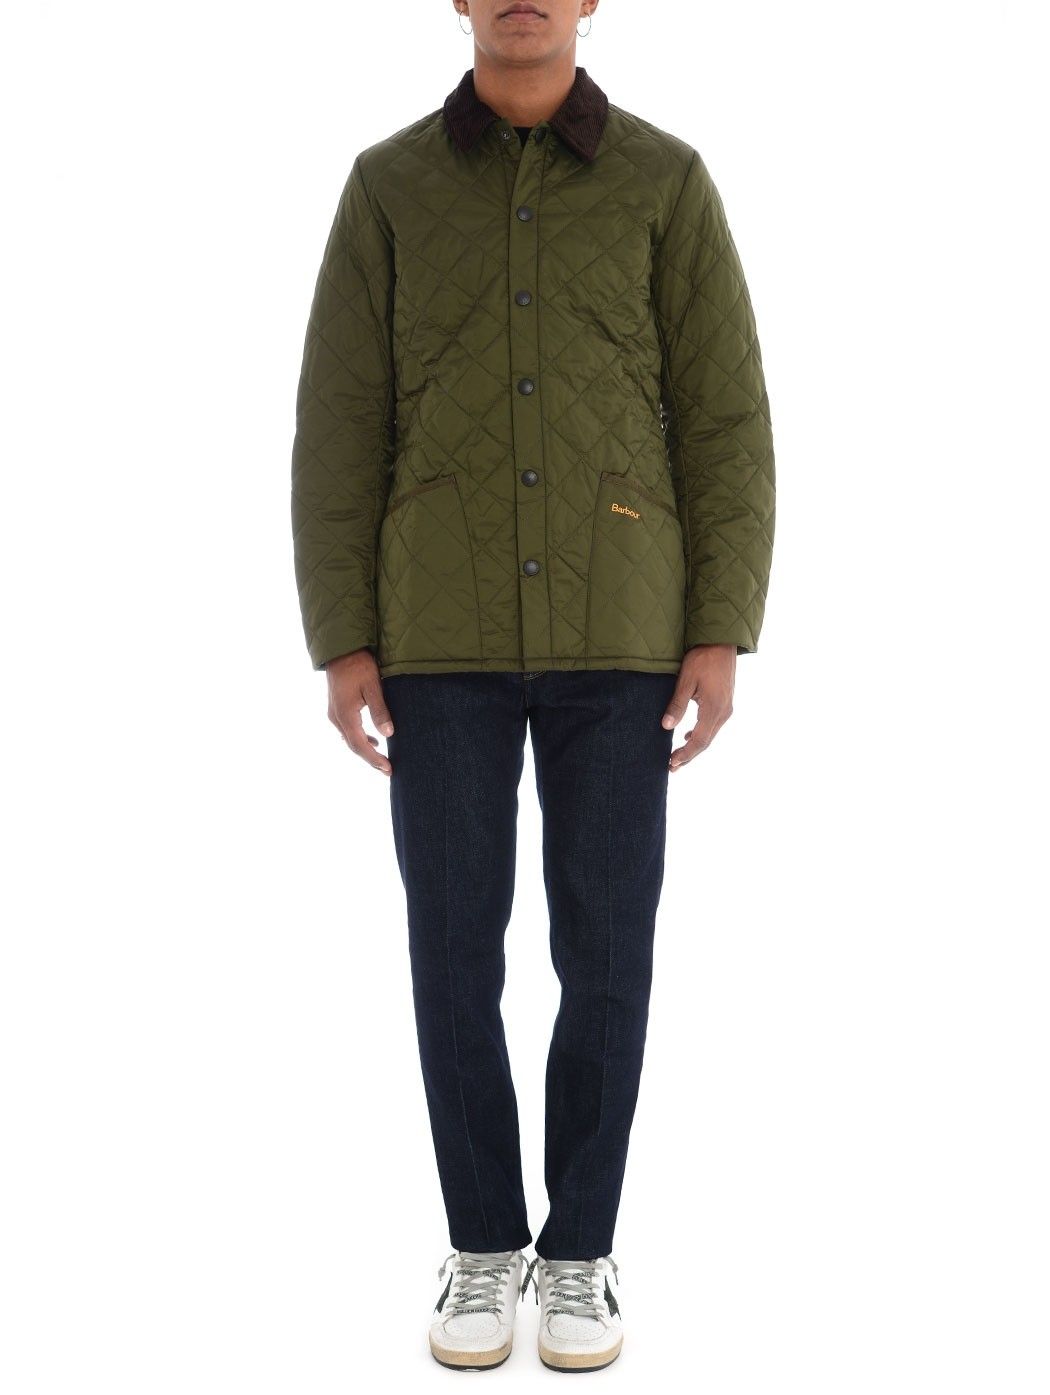  BARBOUR,BARBOUR WOMAN,BARBOUR COLLECTIONS,BARBOUR MEN,BARBOUR BEDALE,BARBOUR BORDER SAGE,BARBOUR REELIN JACKET,BARBOUR DUKE,BARBOUR SPRING SUMMER 2022  BARBOUR MQU0240